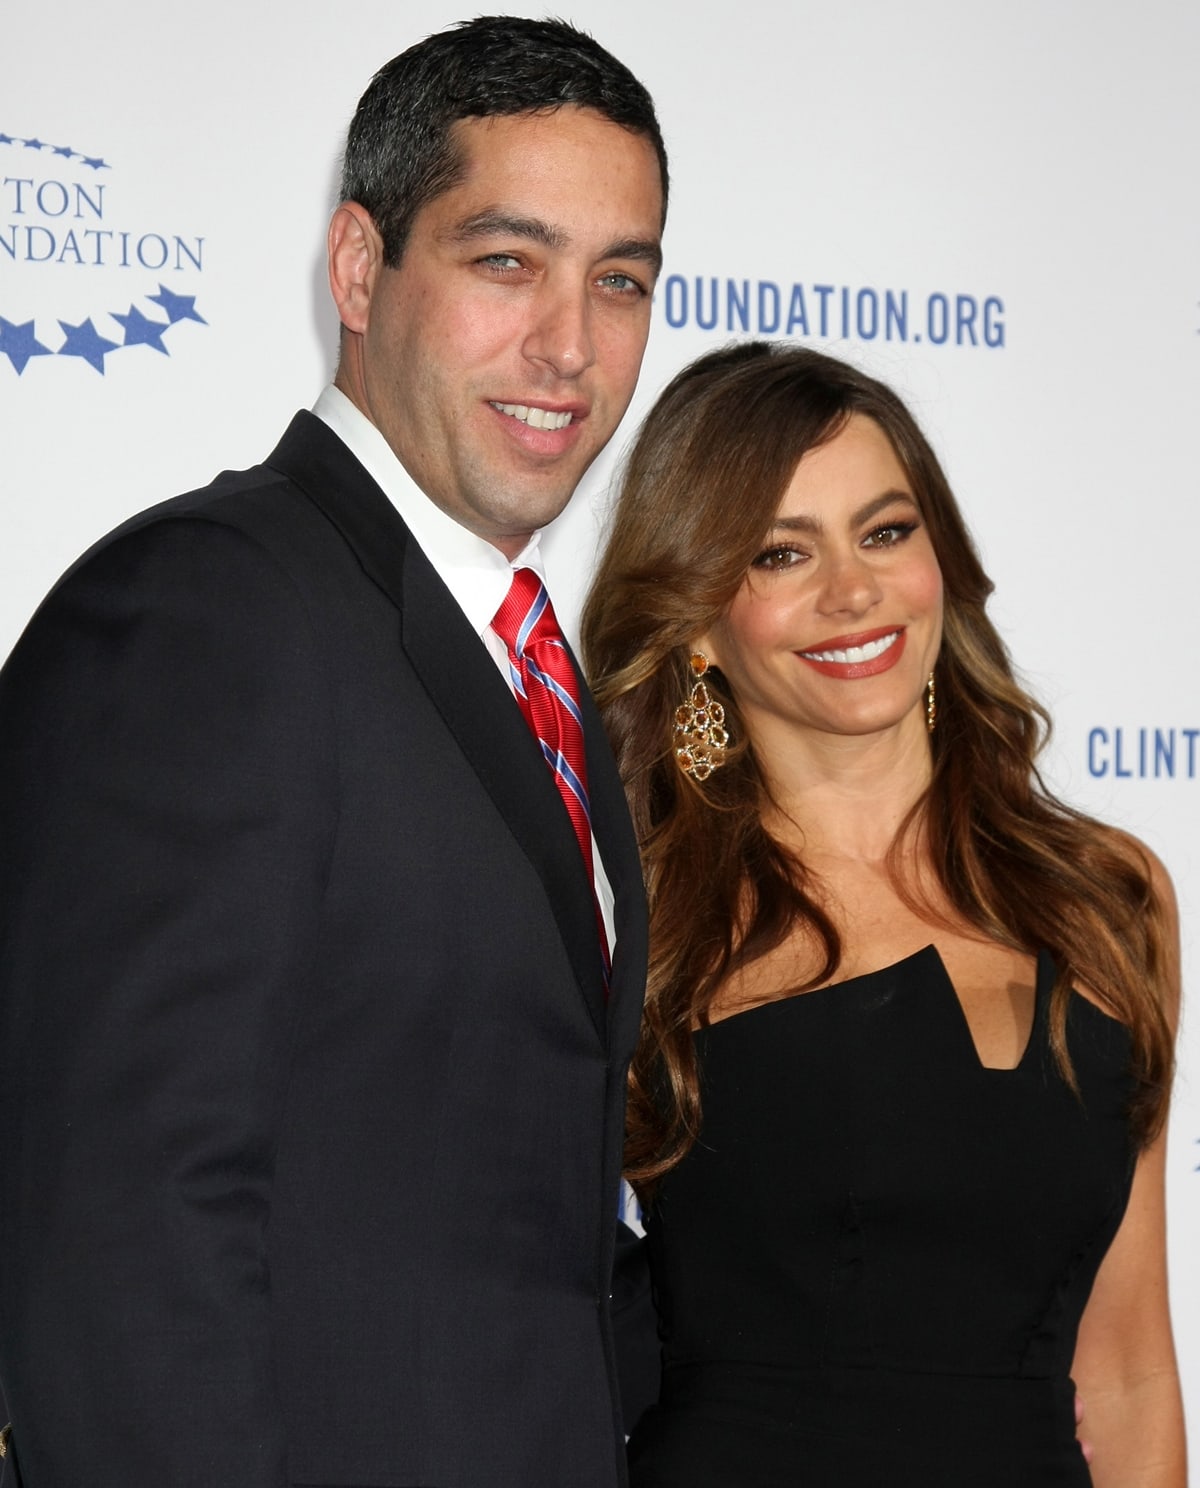 In March 2021, a Los Angeles court ruled in favor of Sofia Vergara in her court case against Nick Loeb over custody rights to frozen pre-embryos